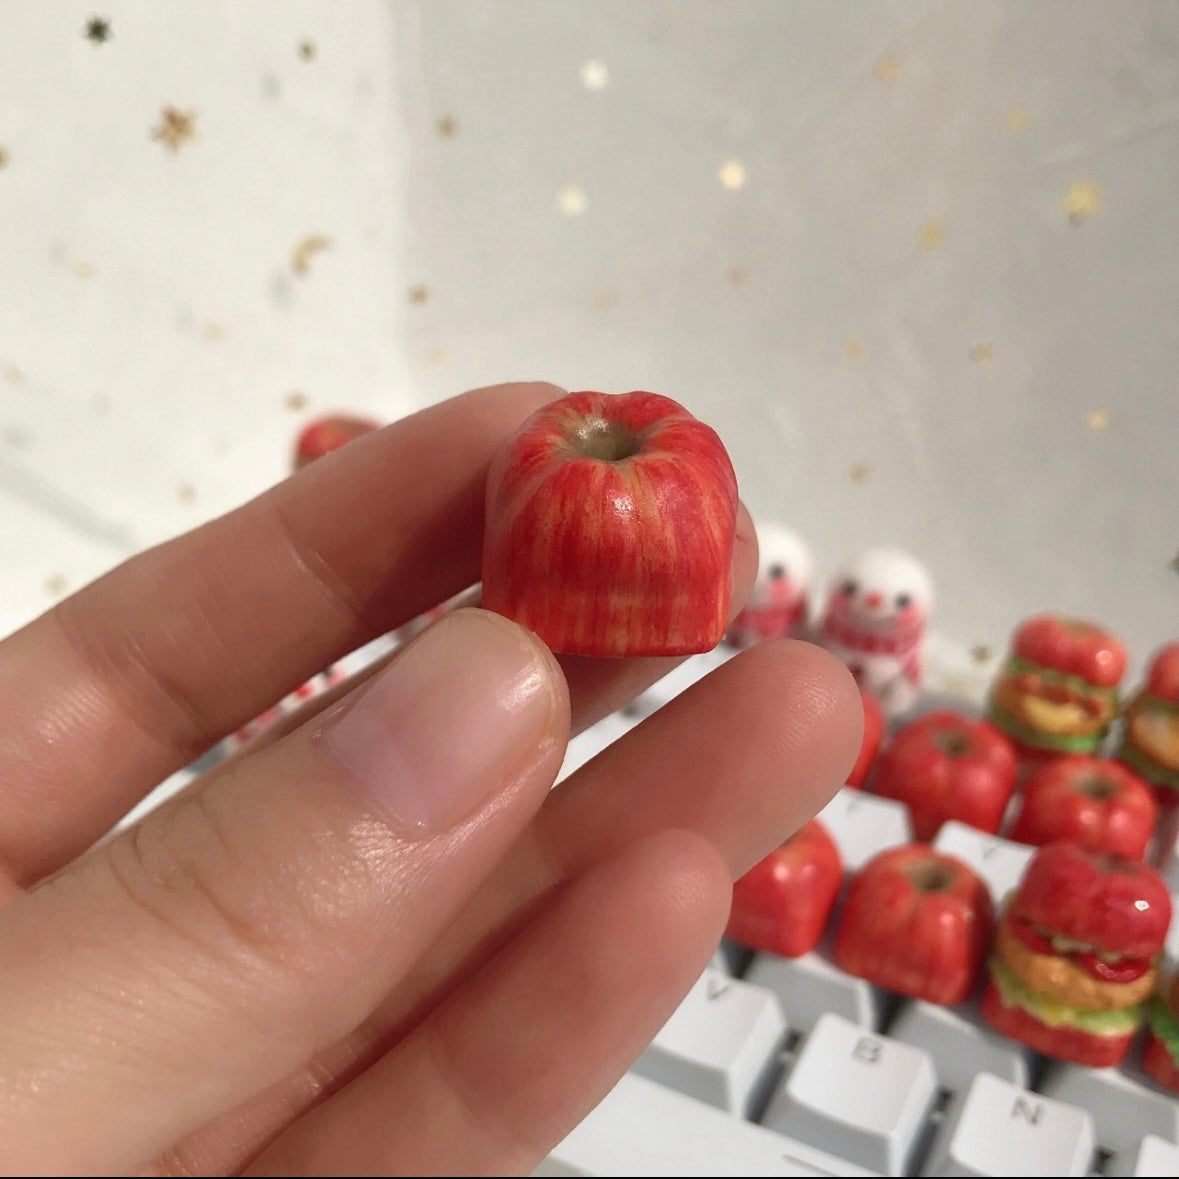 "One key, one apple. Our personalized keycap brings the beauty of the apple to your keyboard experience. Unique and exquisite, this keycap adds a touch of apple charm to your keyboard."